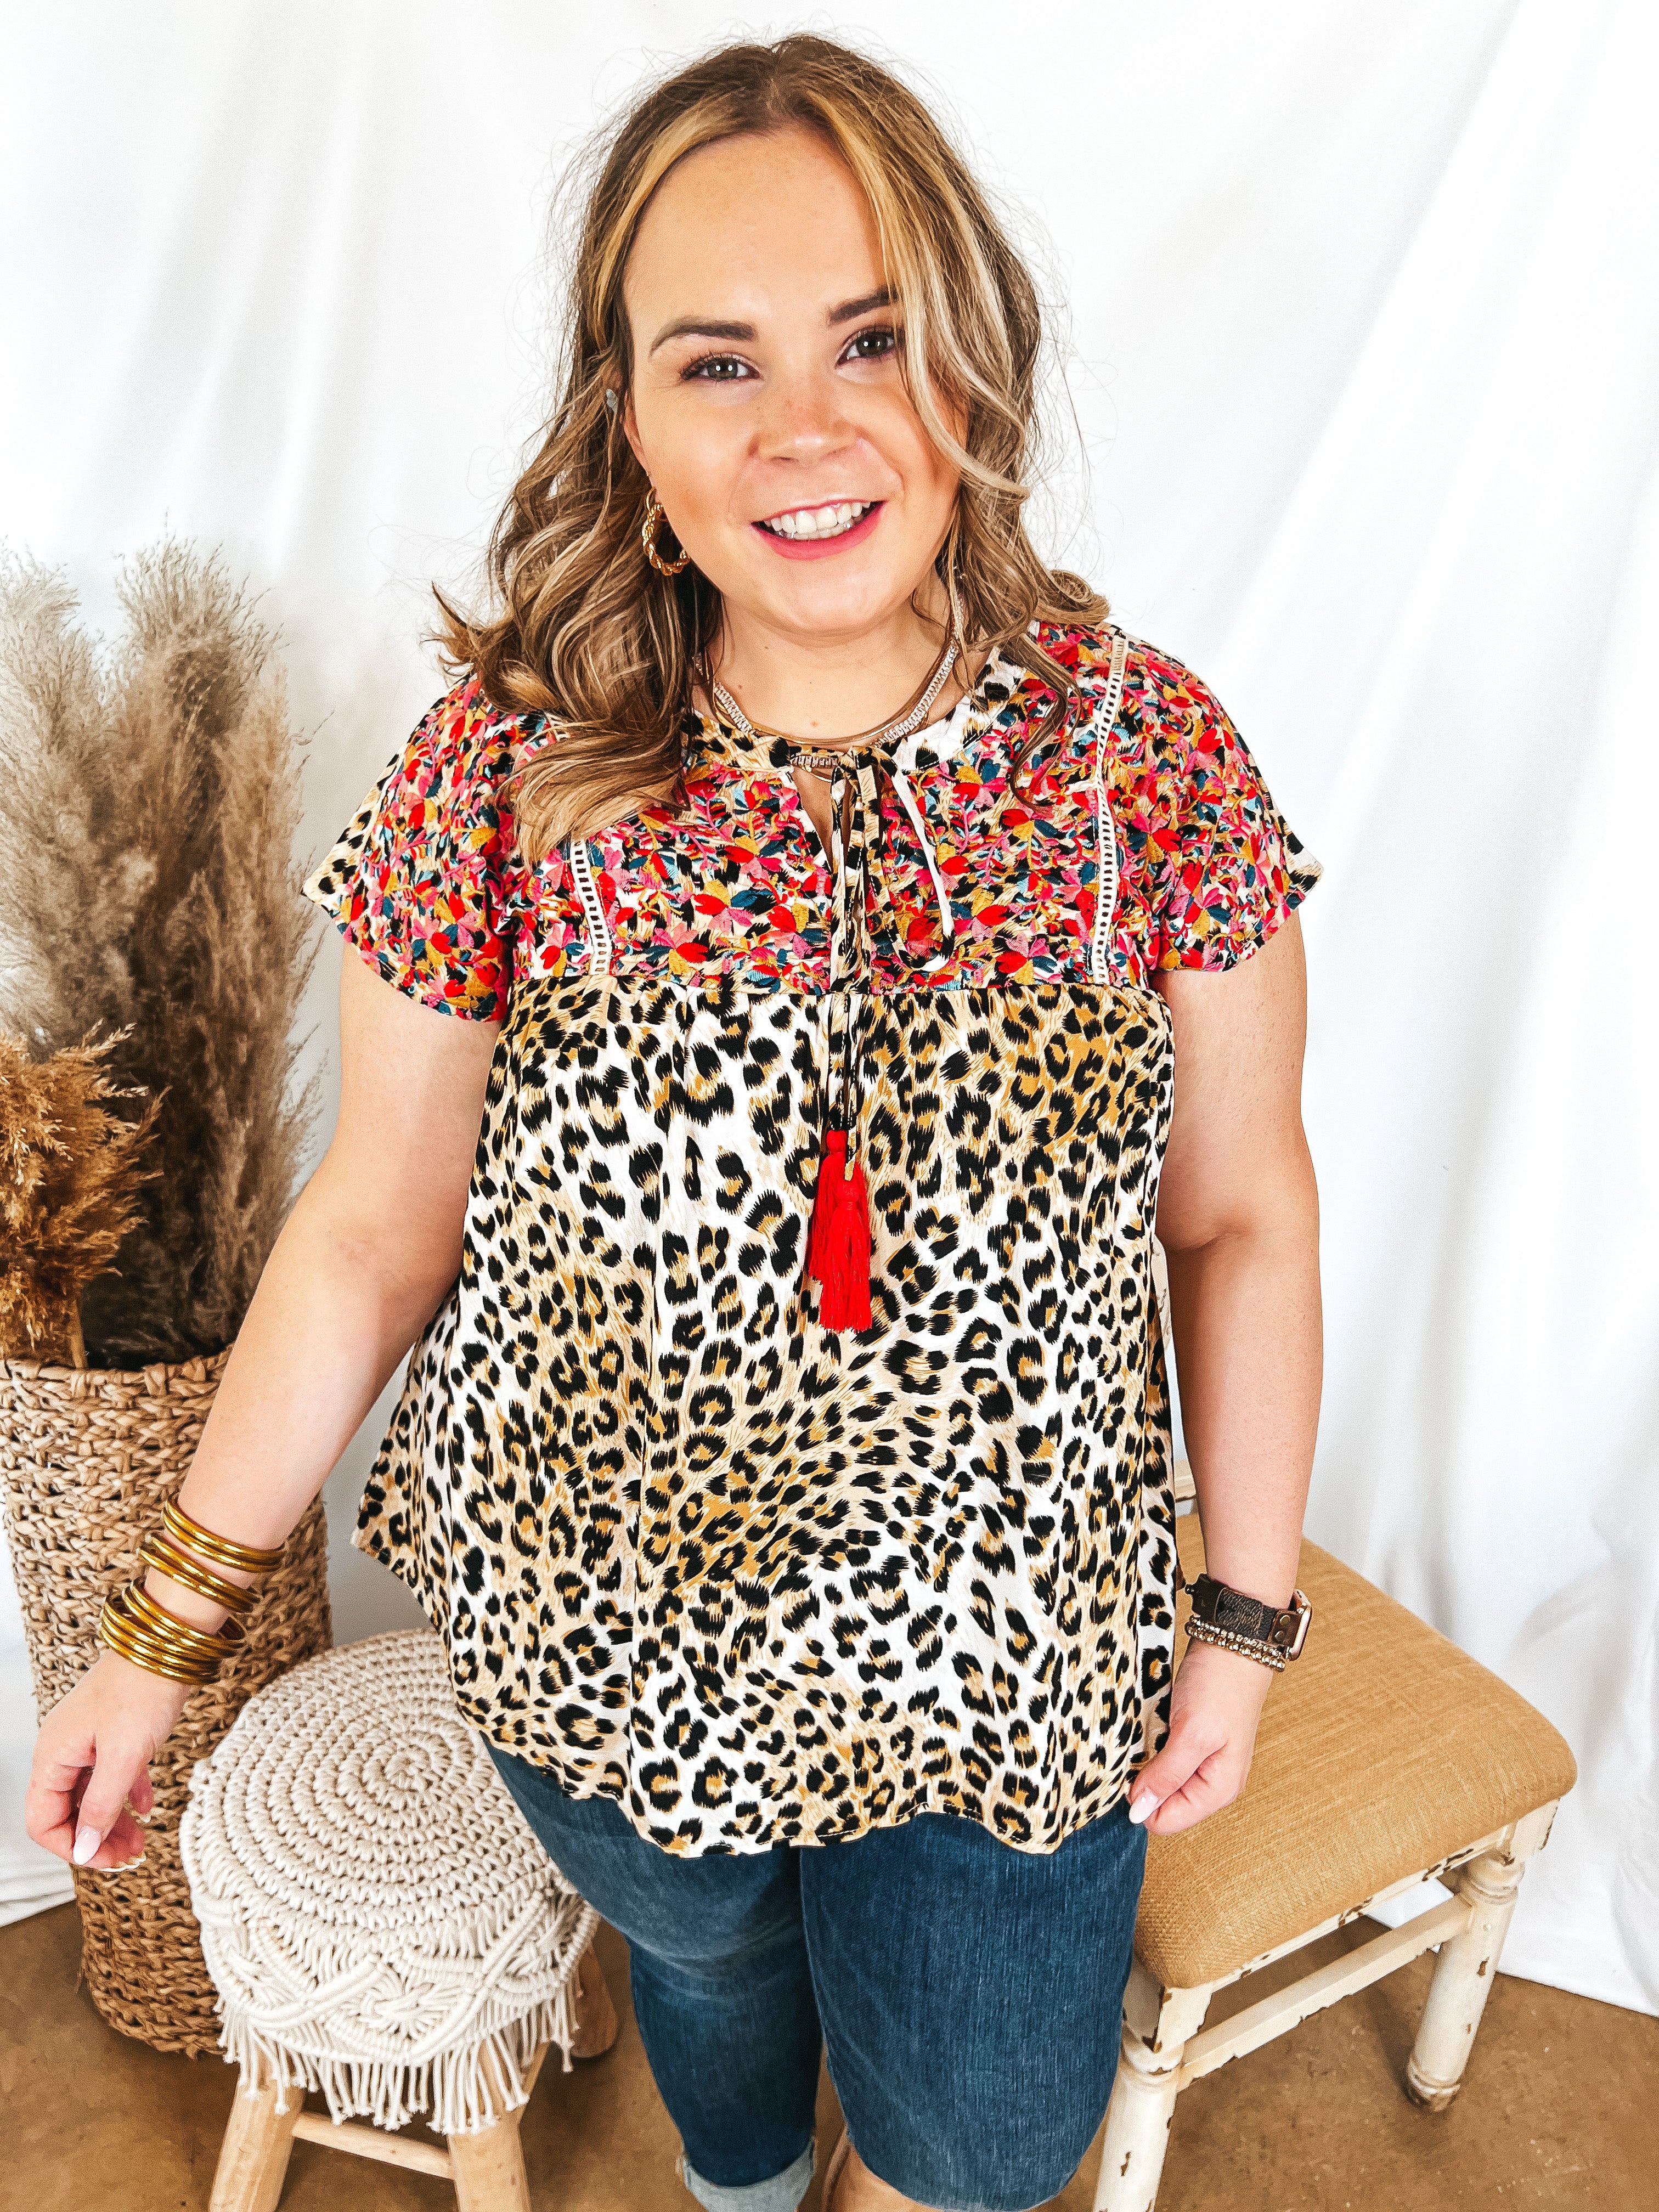 Fredericksburg In the Spring Embroidered Short Sleeve Top with Front Keyhole in Leopard Print - Giddy Up Glamour Boutique